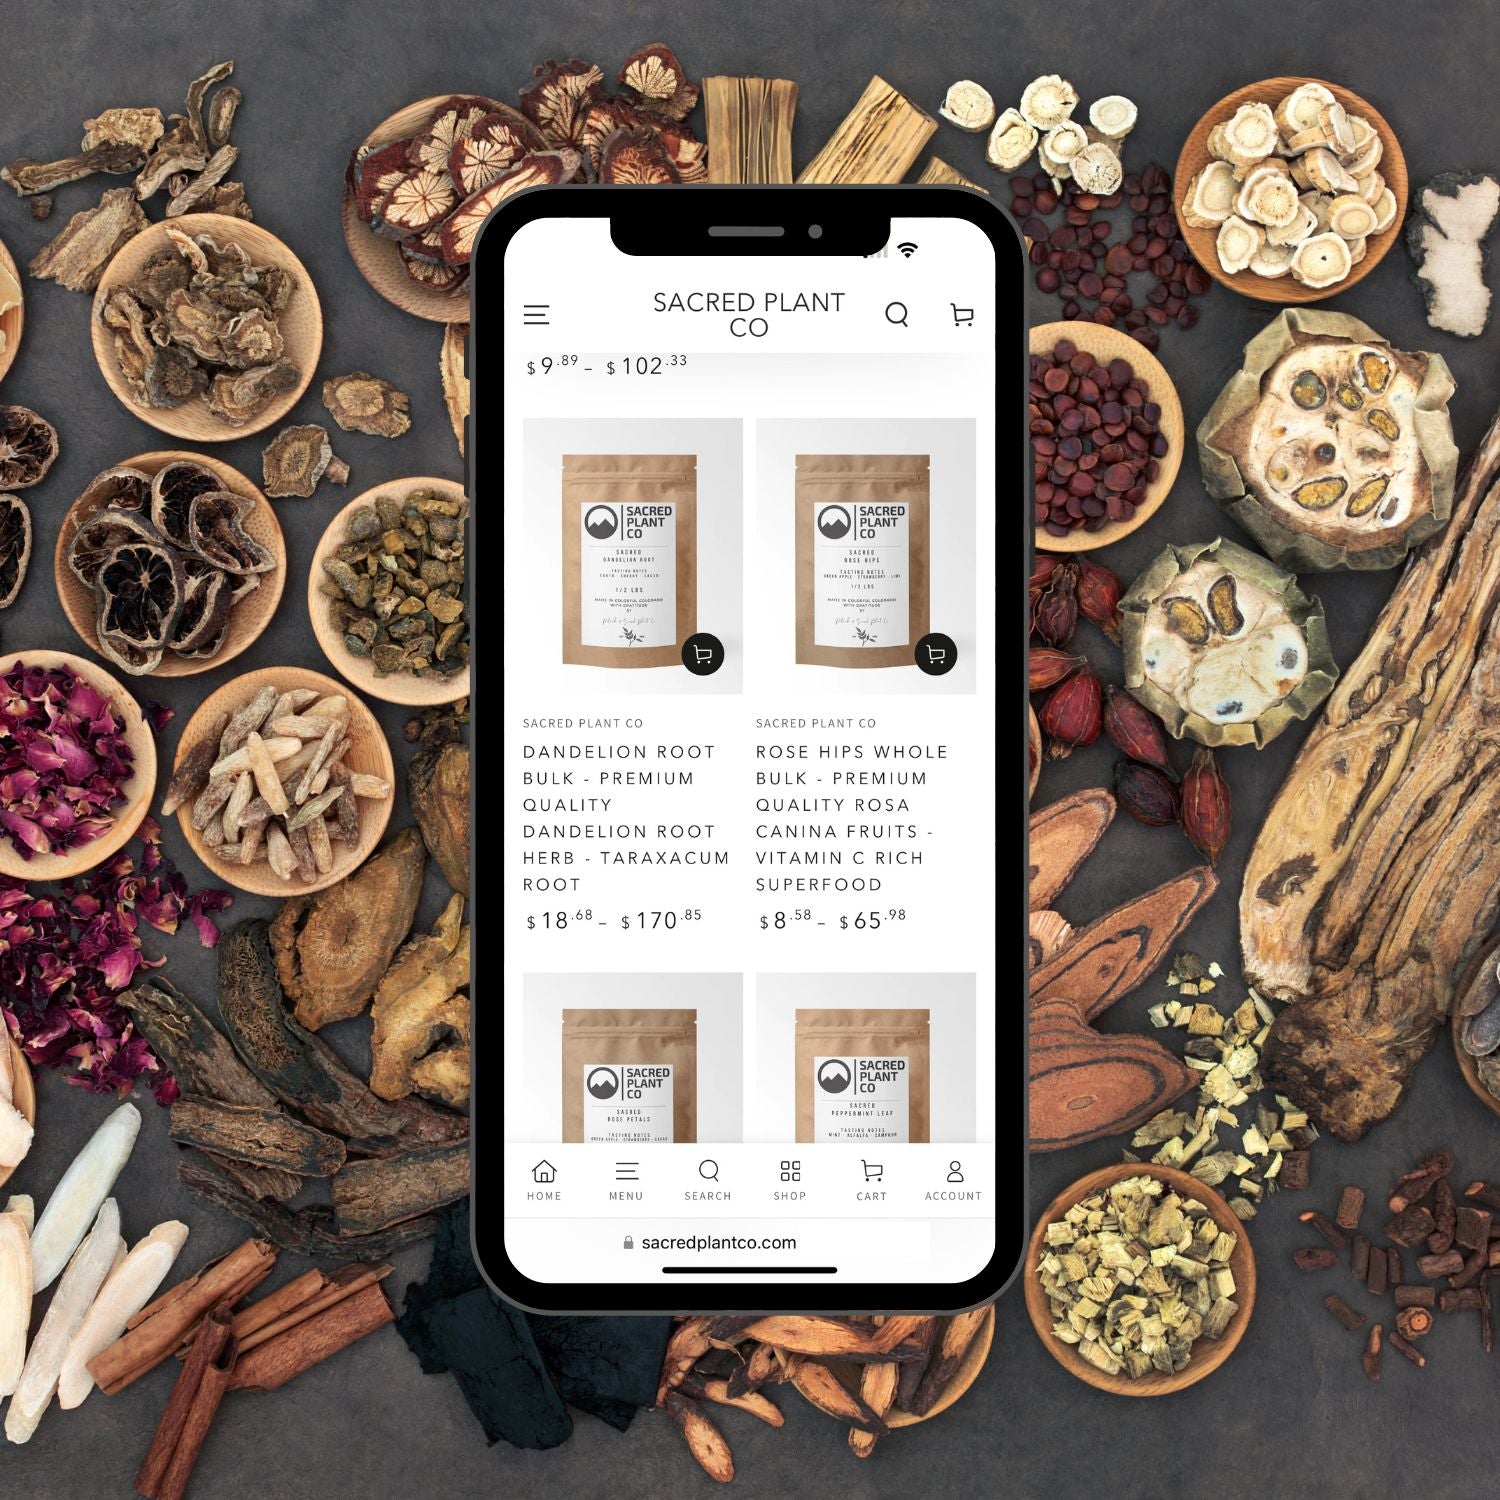 A creative representation of Sacred Plant Co's online presence, featuring traditional Chinese Medicine herbs like Ginseng and Astragalus artistically arranged around a digital device displaying the website